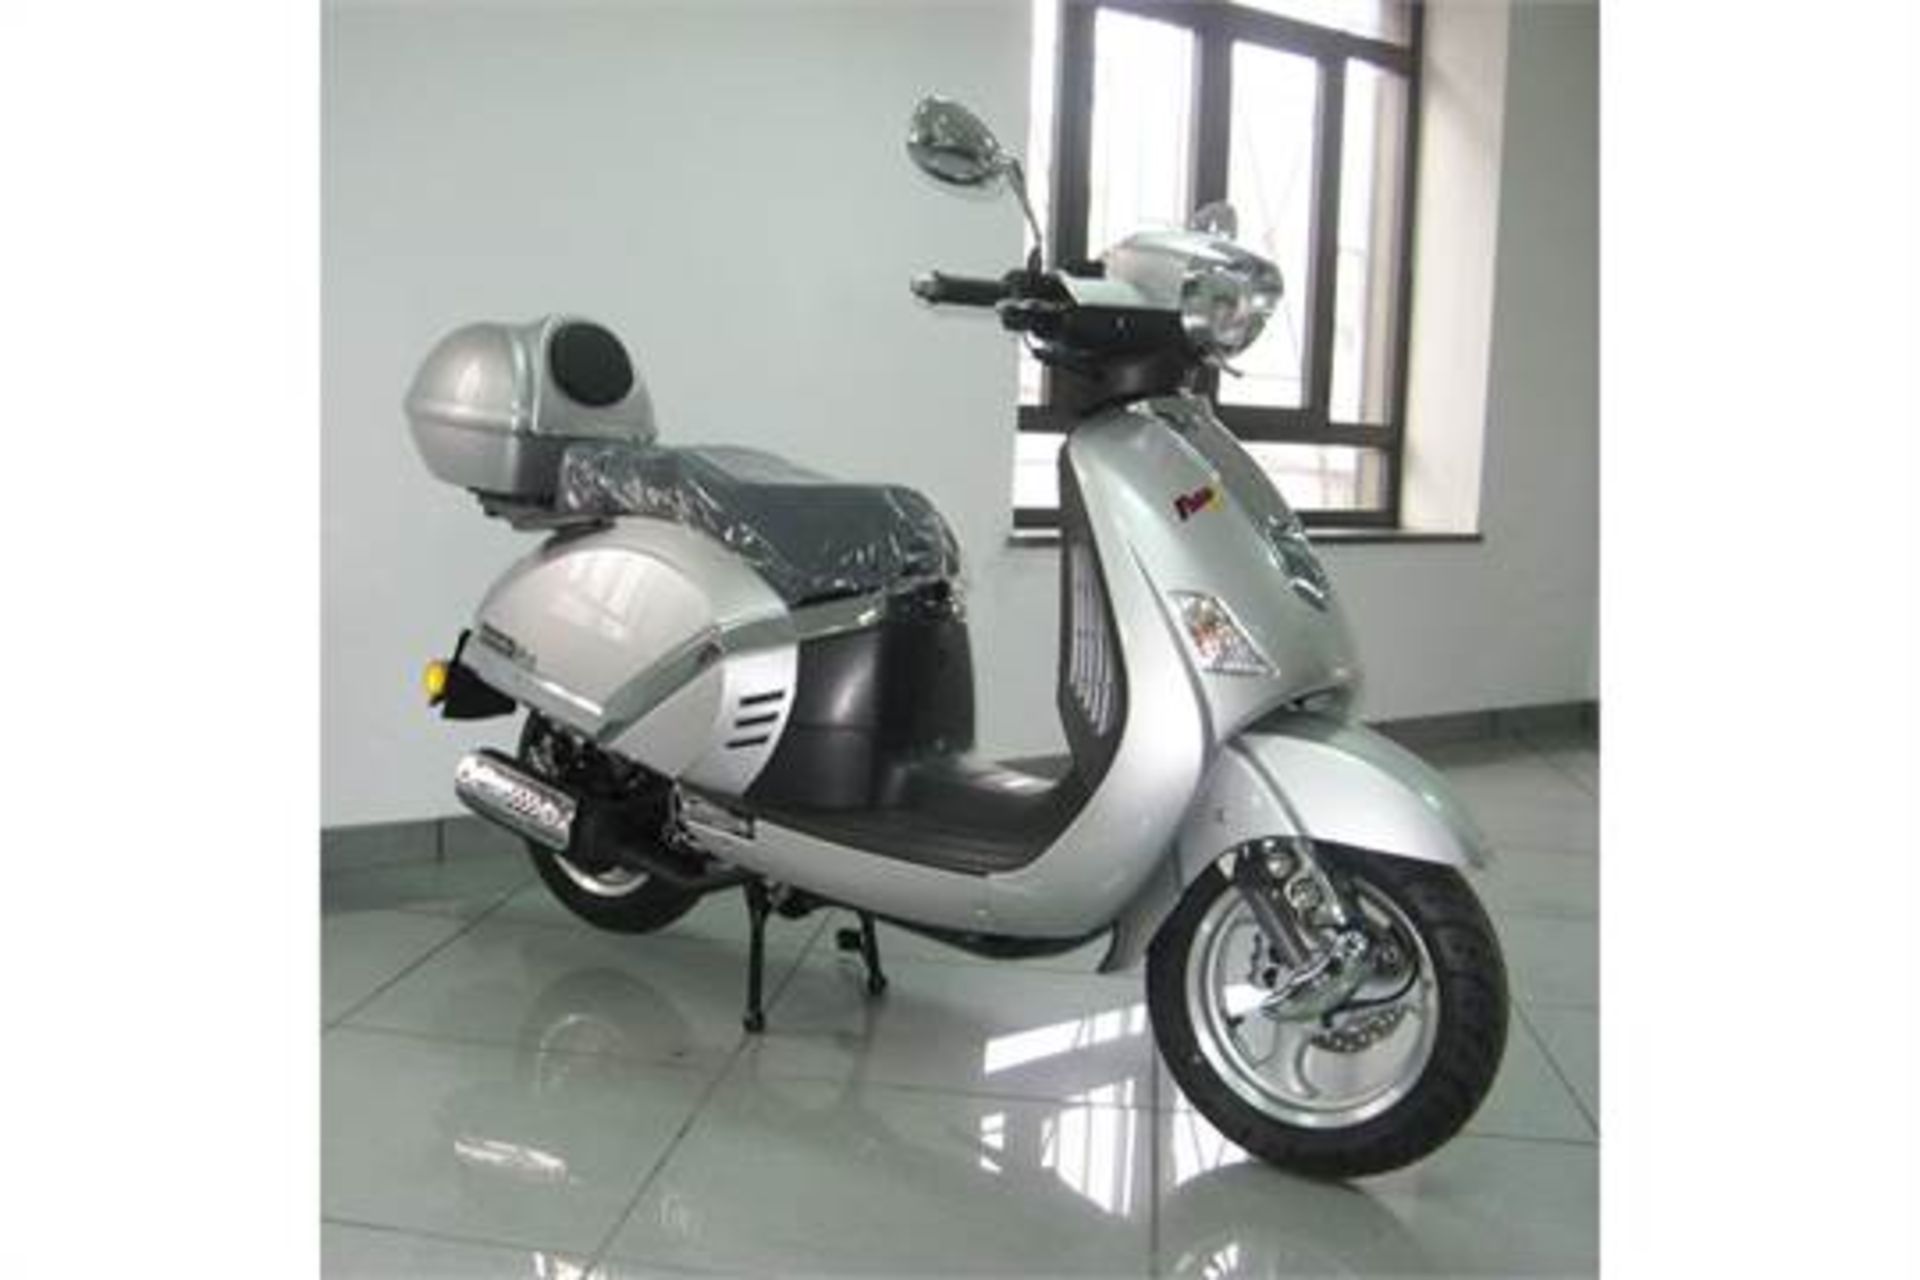 1 x Brand new, boxed Lambretta PATO (151CC) Scooter in SILVER. Unregistered and ready to go. - Image 4 of 6